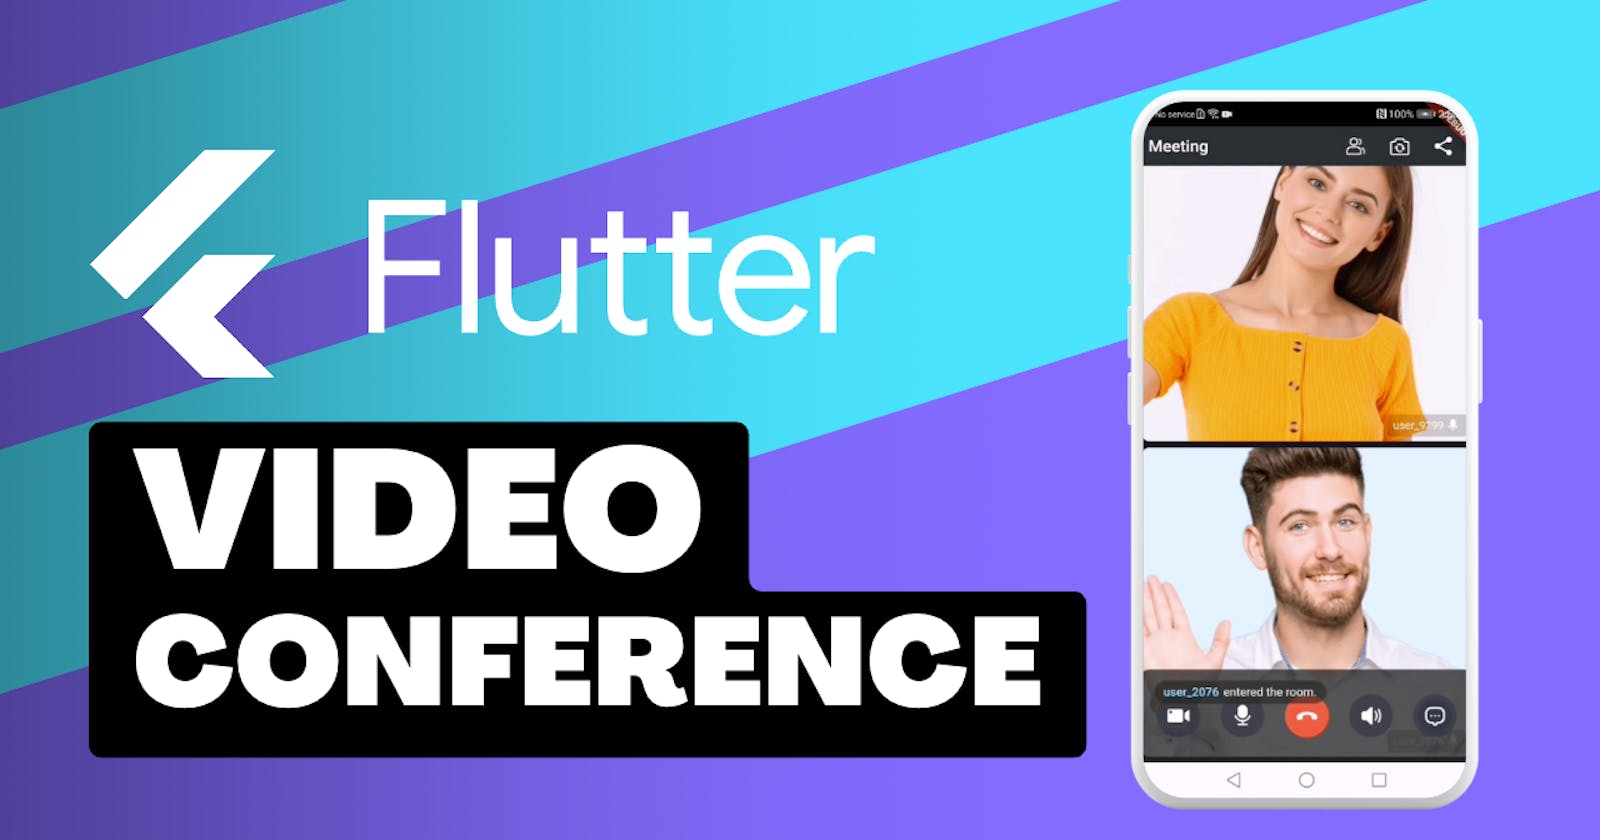 Add a Video Conference feature to your Flutter App